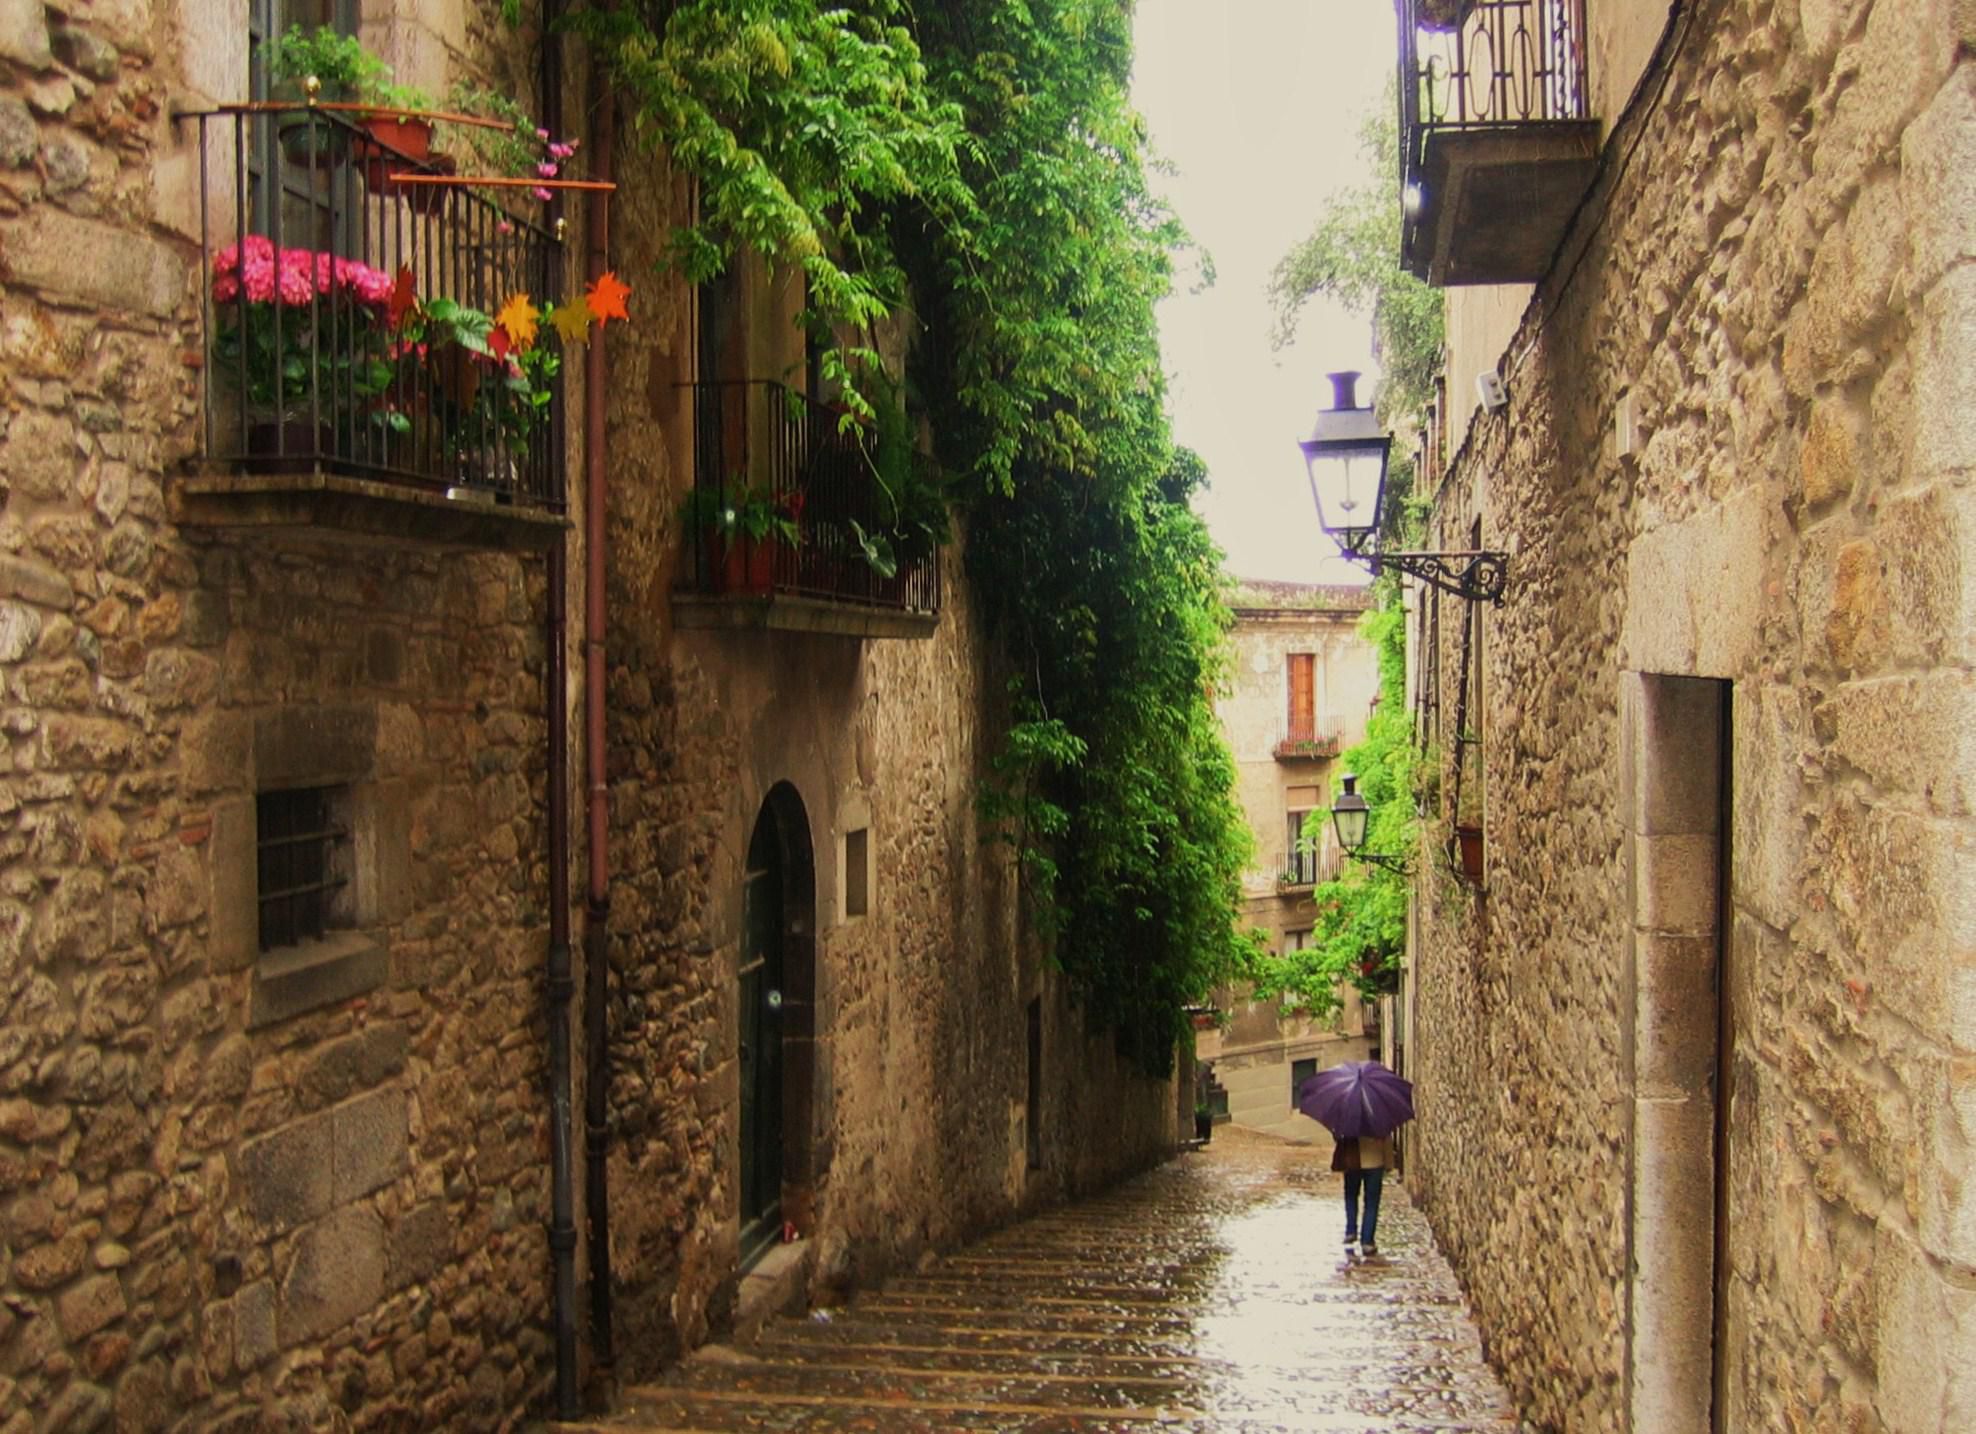 A step-by-step guide to traveling from Barcelona to Girona